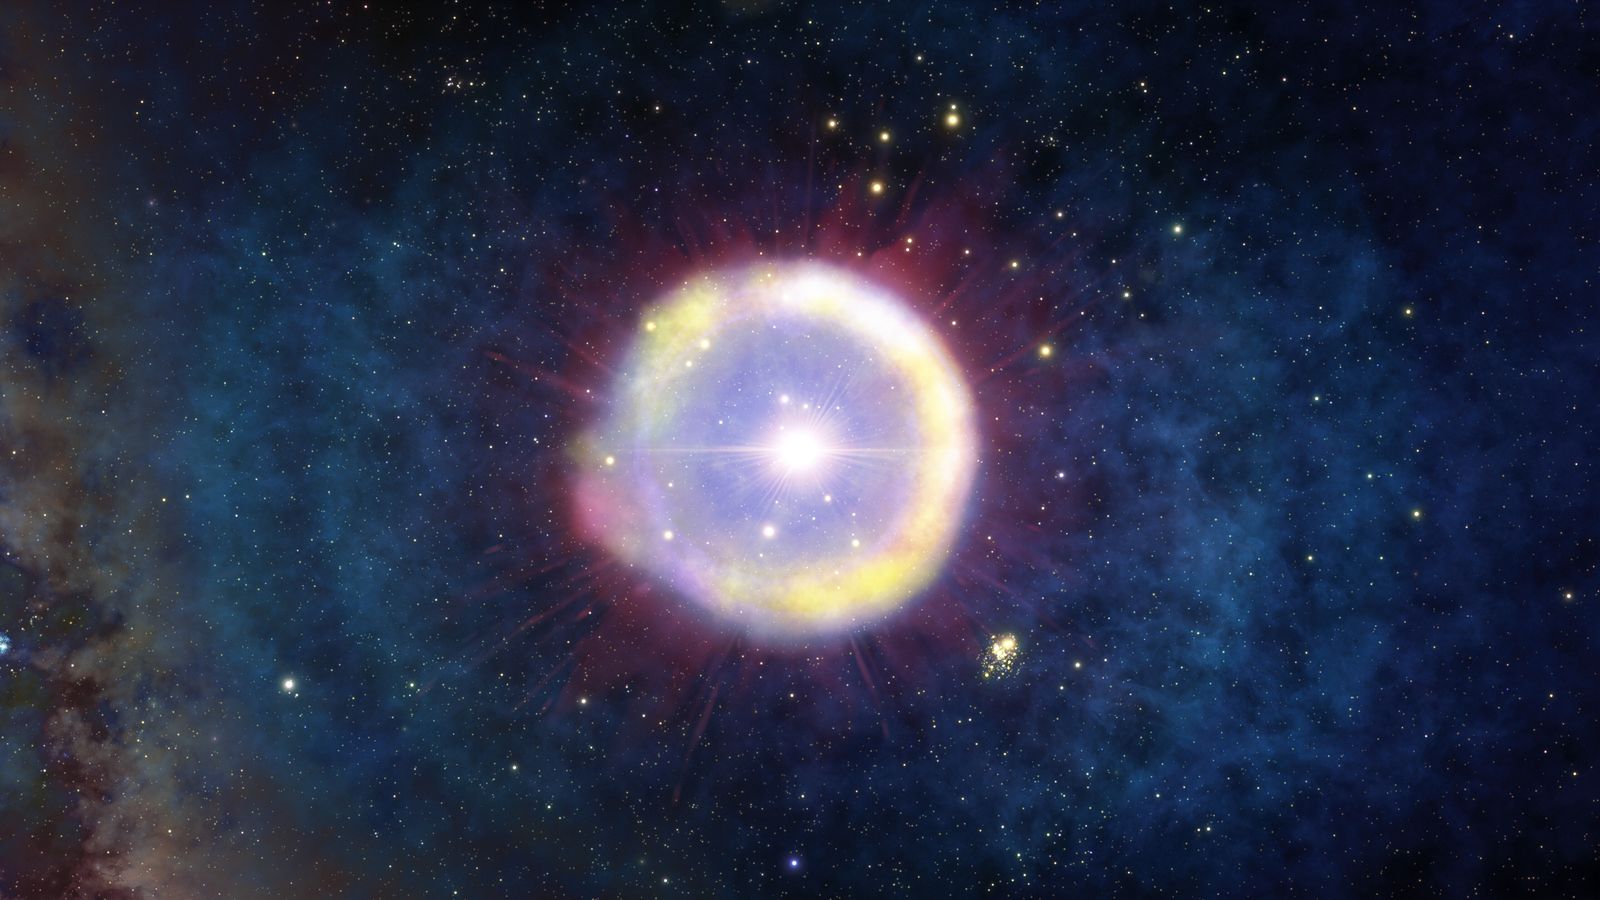 An Early Star’s Remains May Be Swirling Around a Black Hole